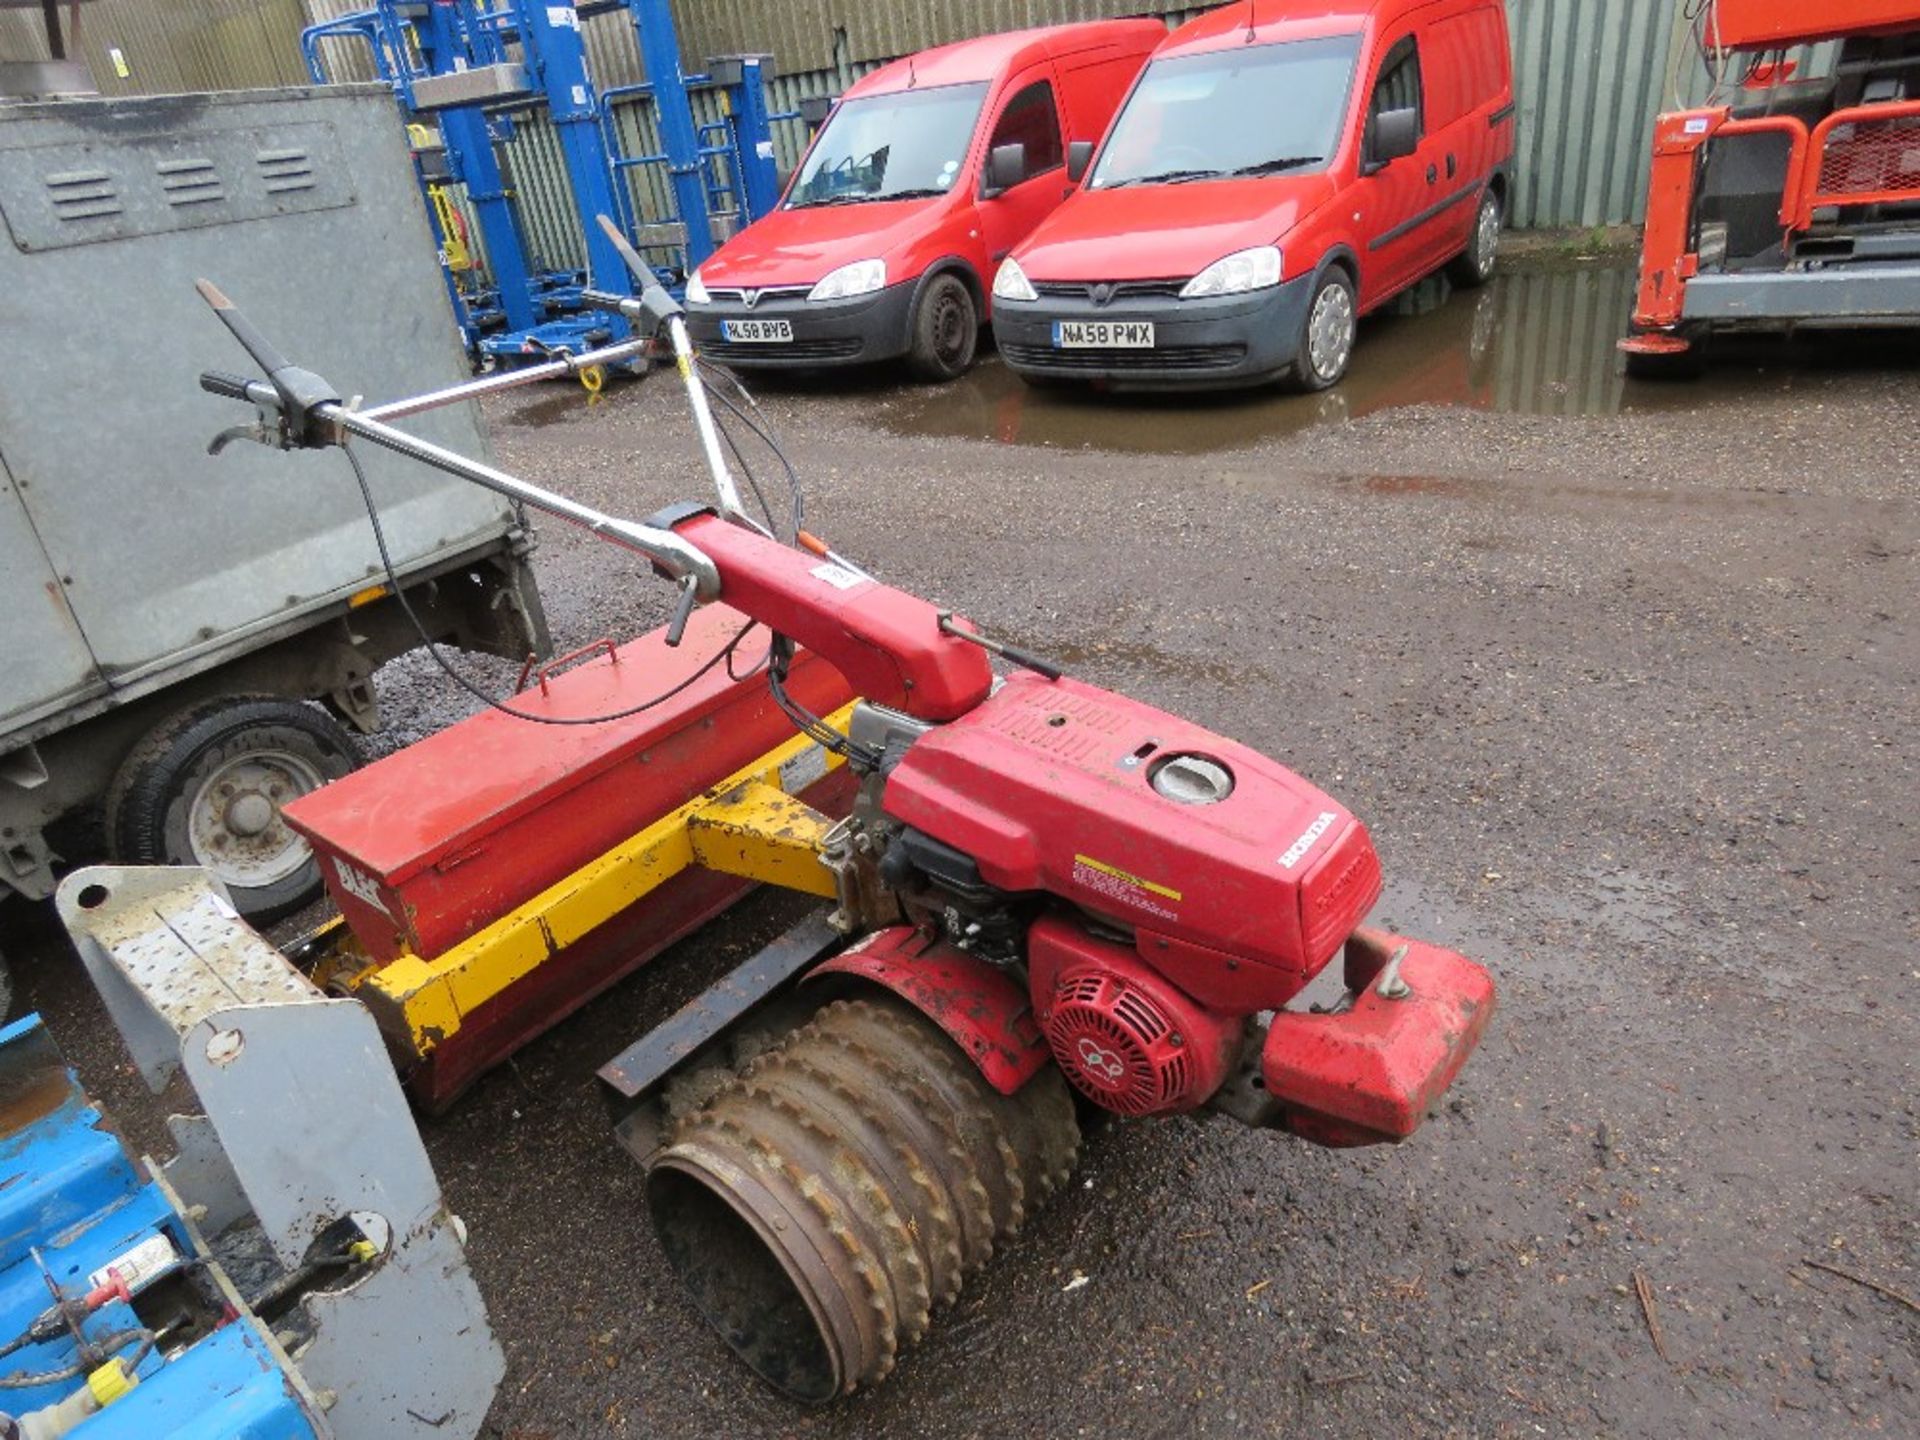 BLEC CP36 SEEDER UNIT MOUNTED ON HONDA F660 DRIVE UNIT, SOURCED FROM LIQUIDATION. NO PULL CORD SO UN - Image 3 of 6